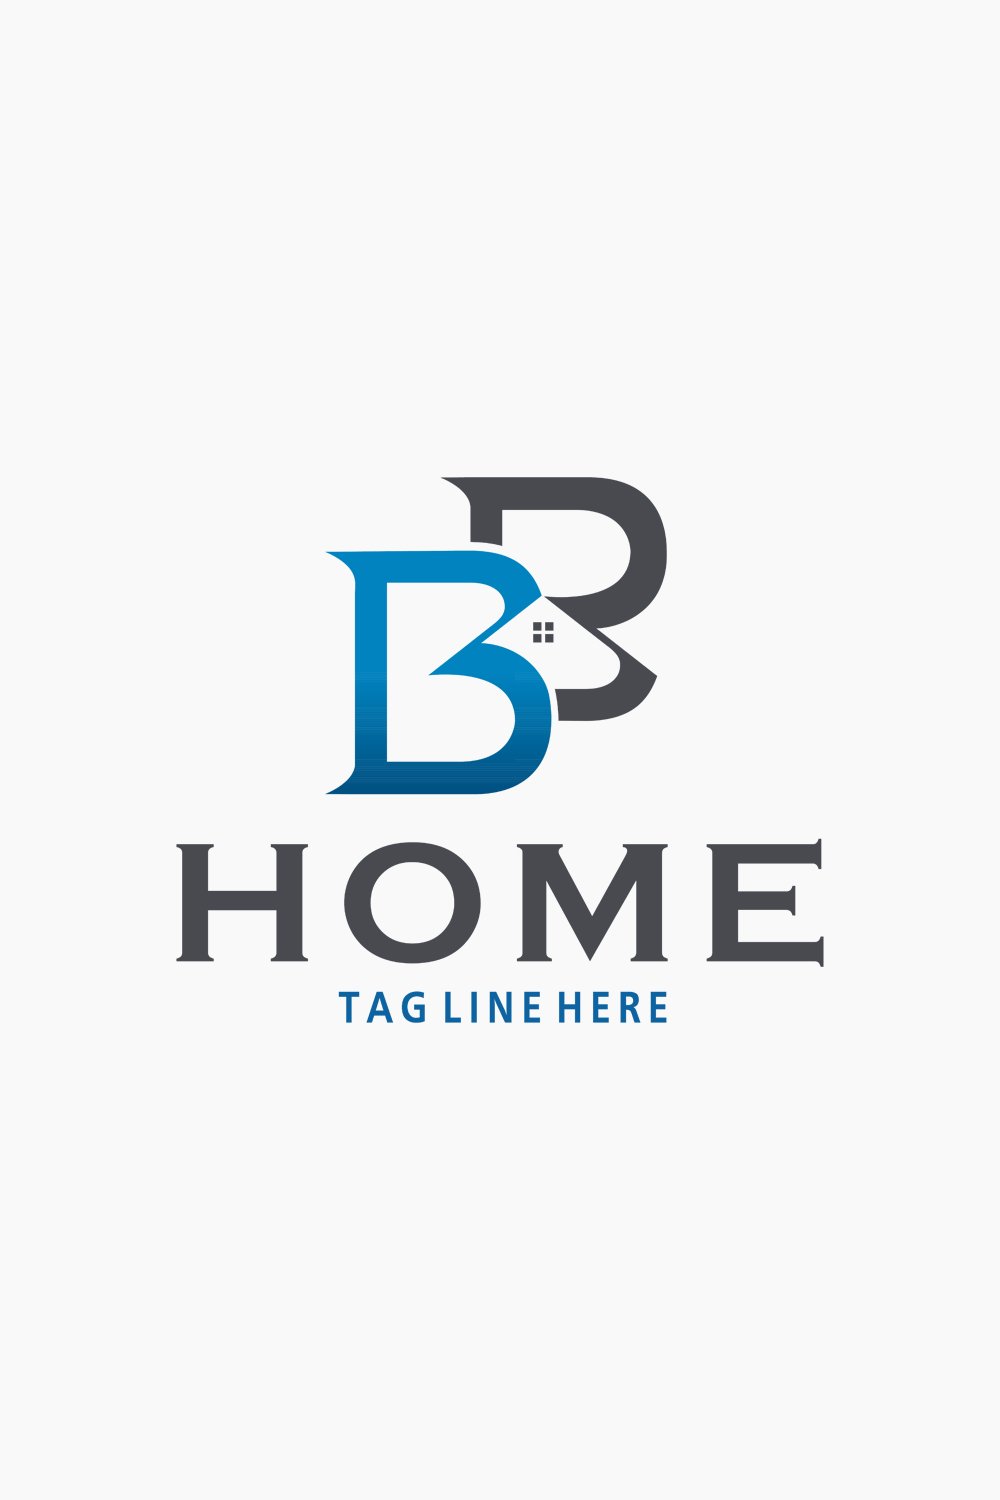 Real Estate Logo Design BB homes for initial "BB" pinterest preview image.